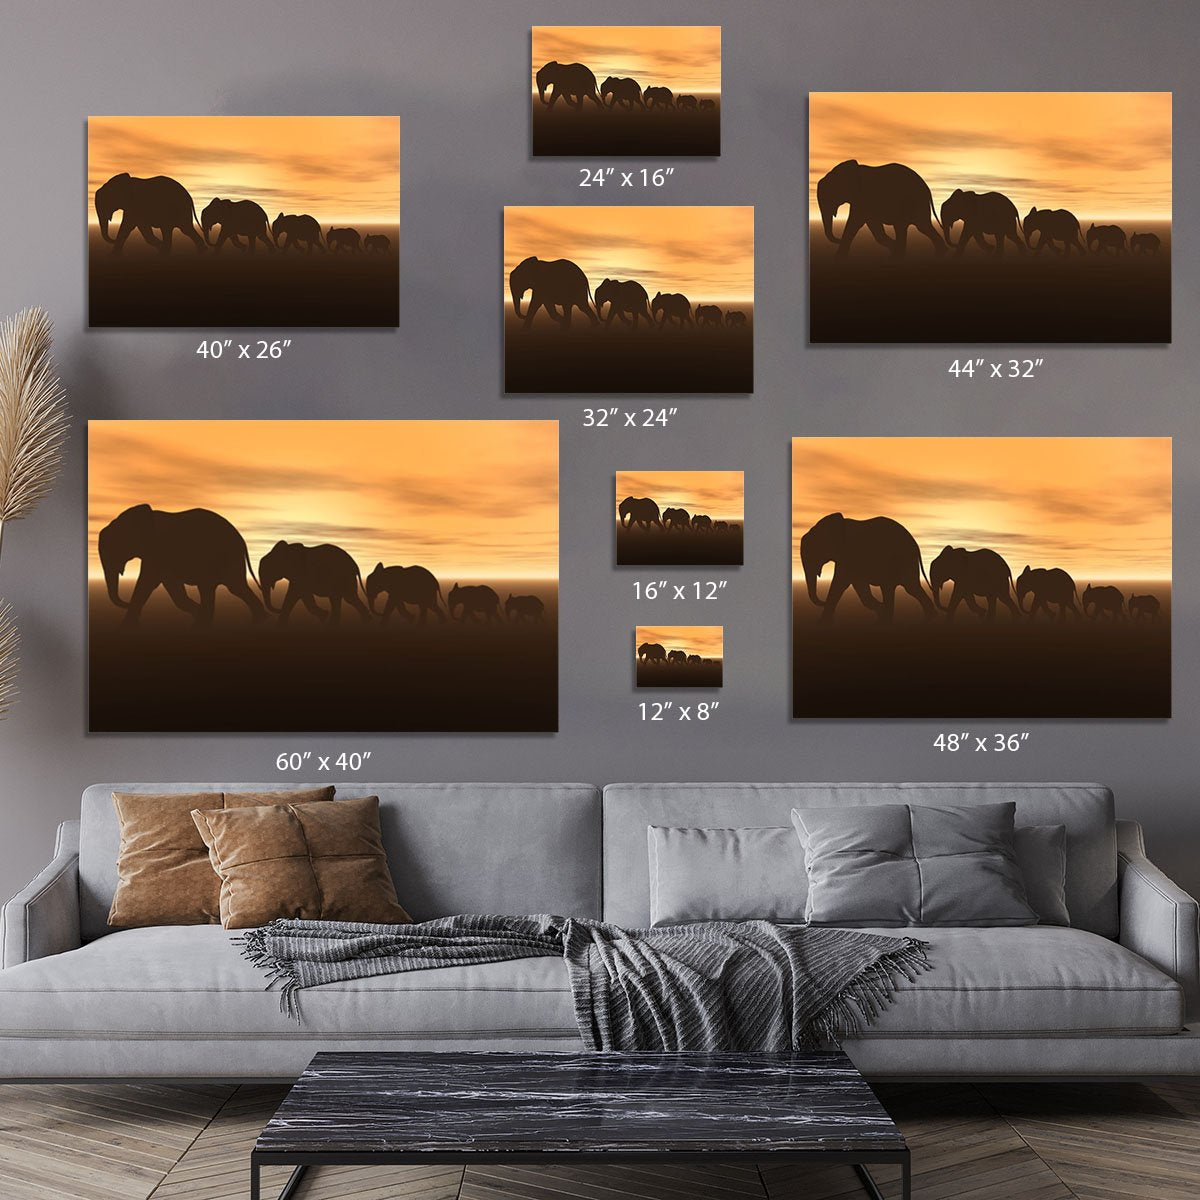 3D render of elephants Canvas Print or Poster